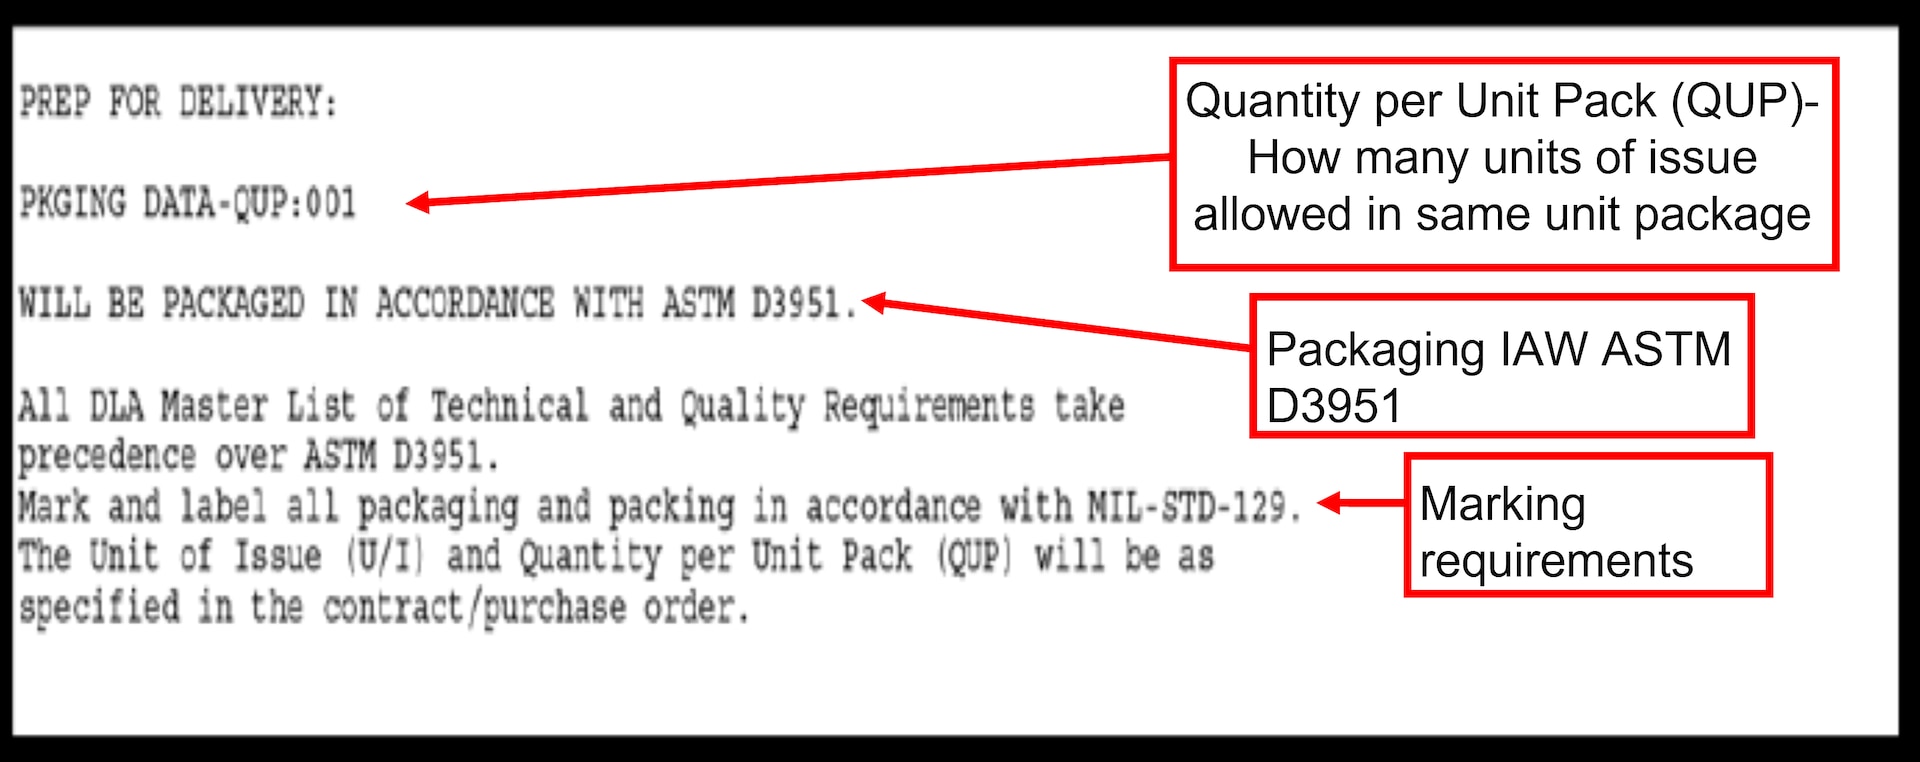 Graphic of a part of section B on the contract/solicitation highlighting the quantity per unit pack, packaging, and marking requirements.